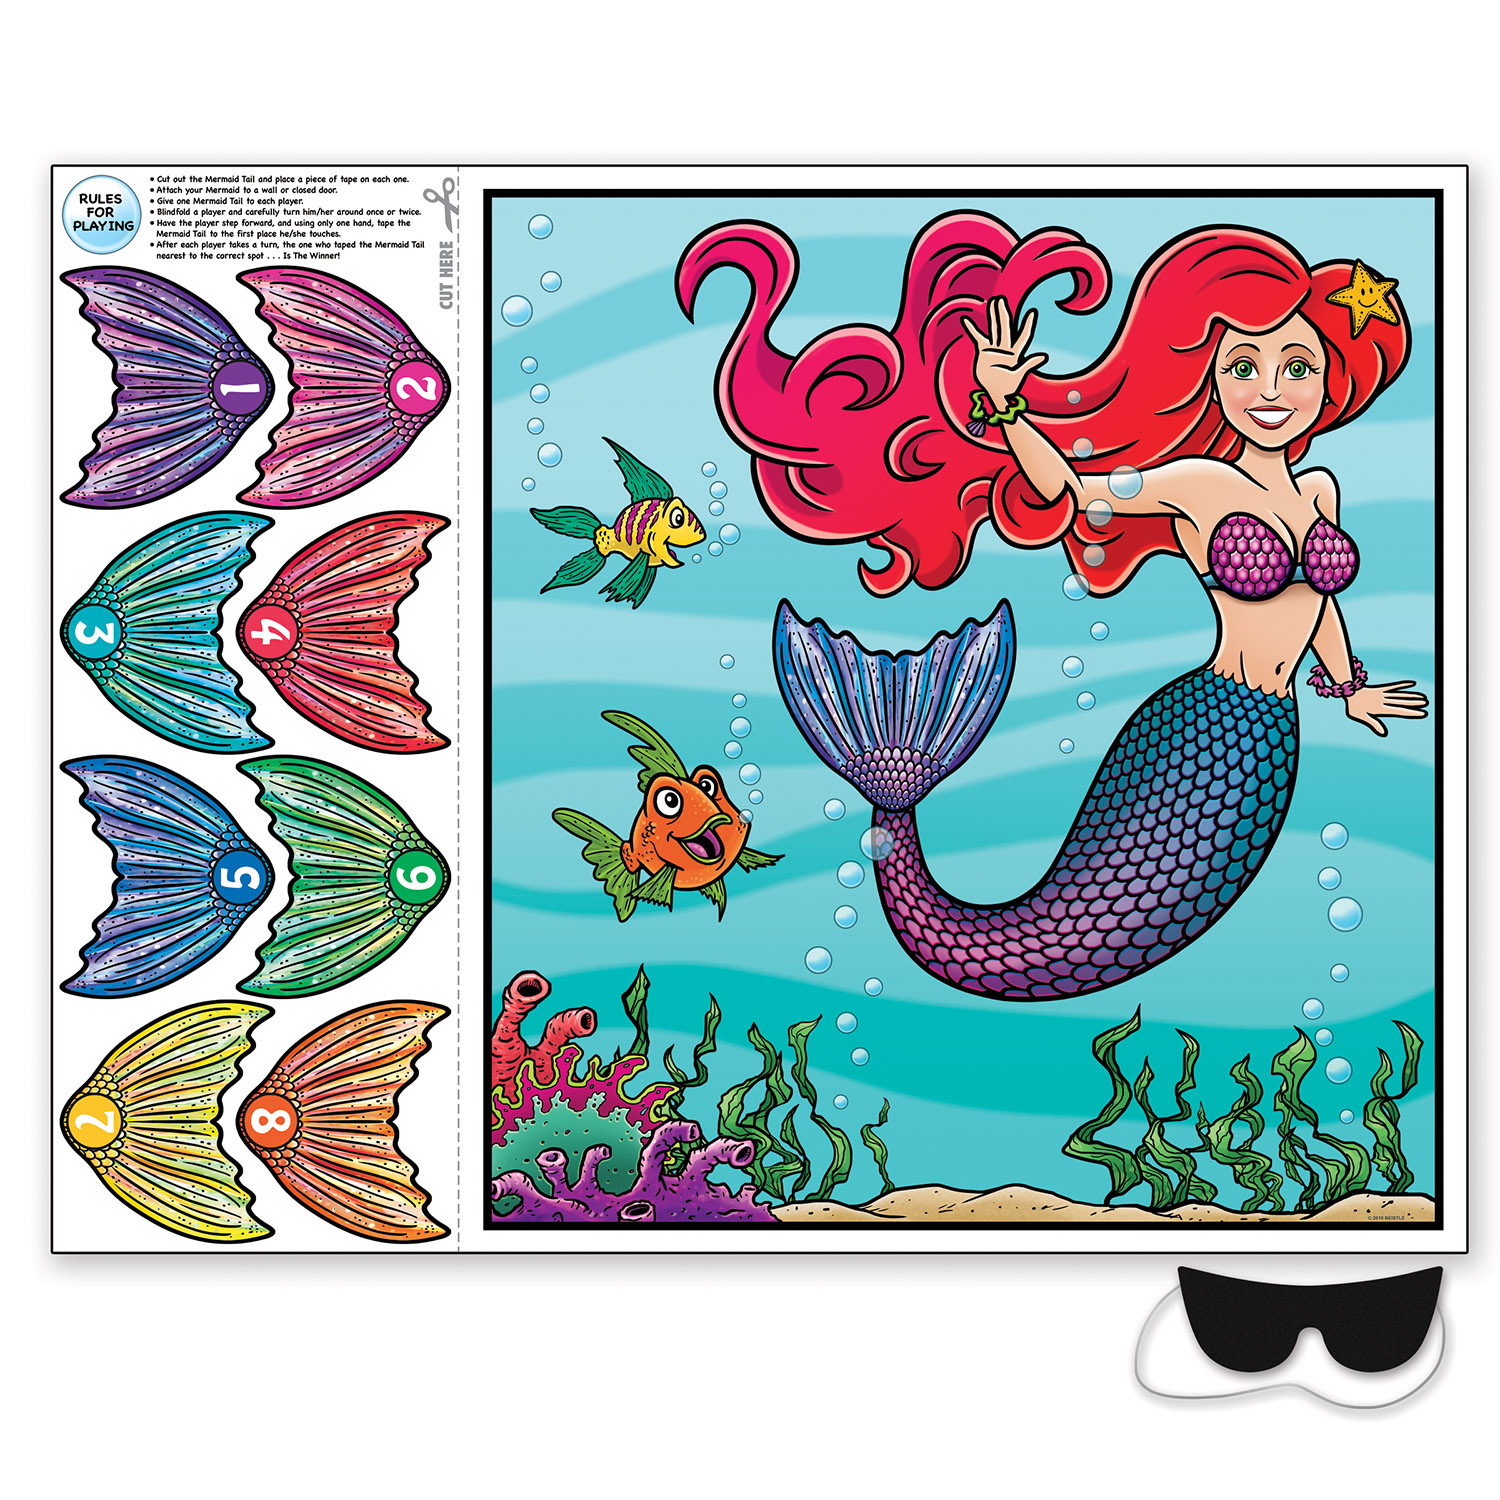 Pin The Tail On The Mermaid GAME